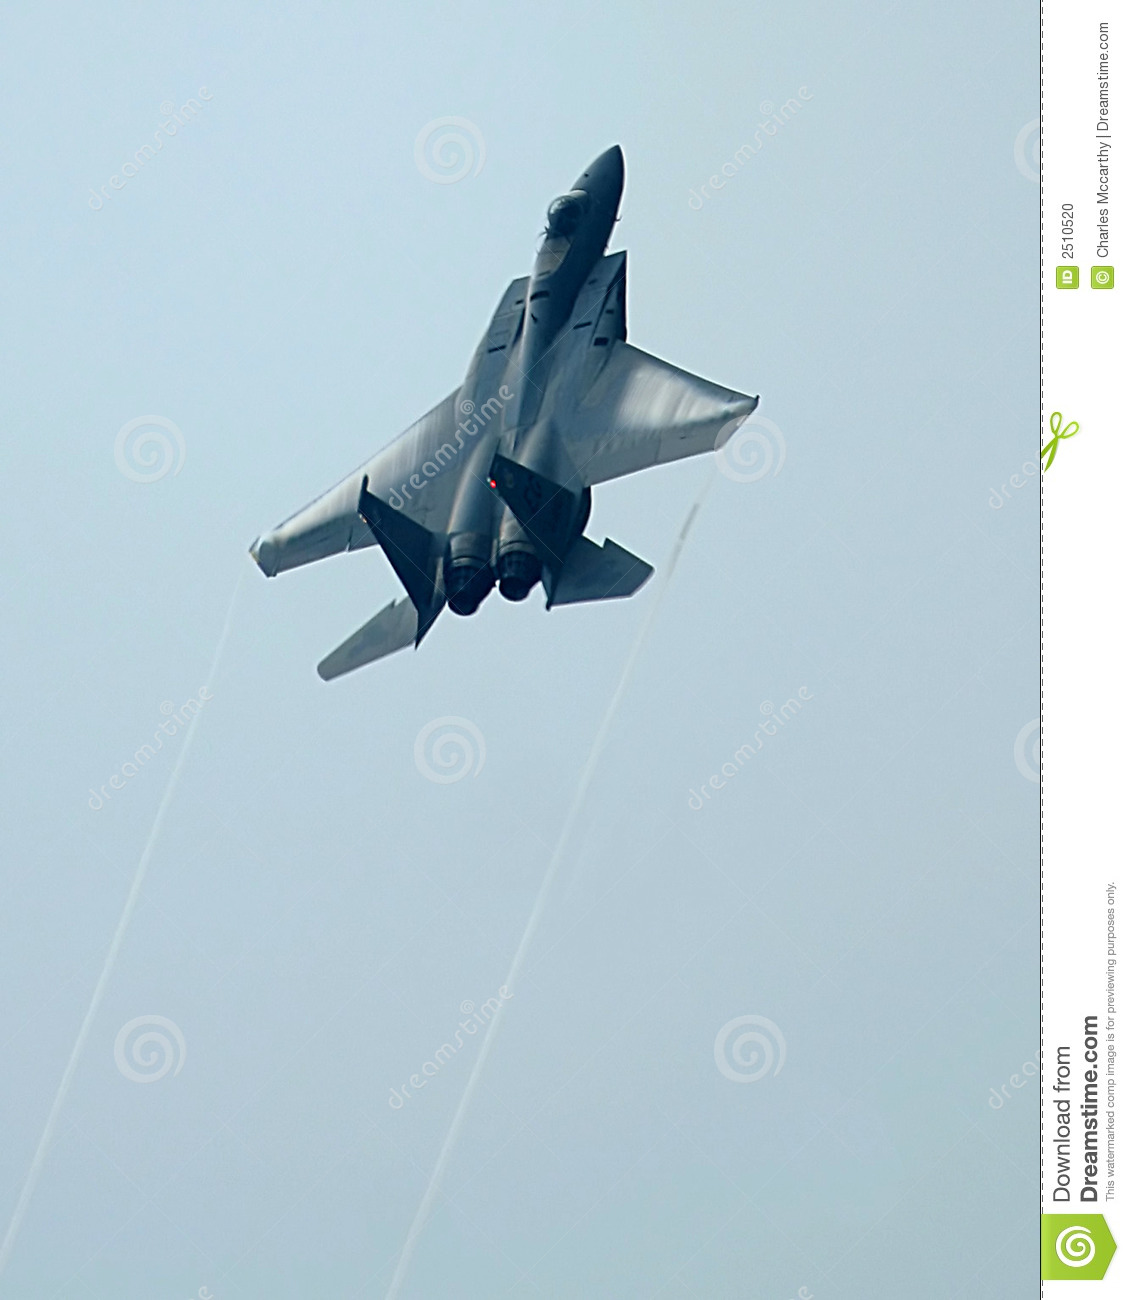 An F 15 Fighter Jet In A Vertical Climb Against A Cloudless Pale Blue